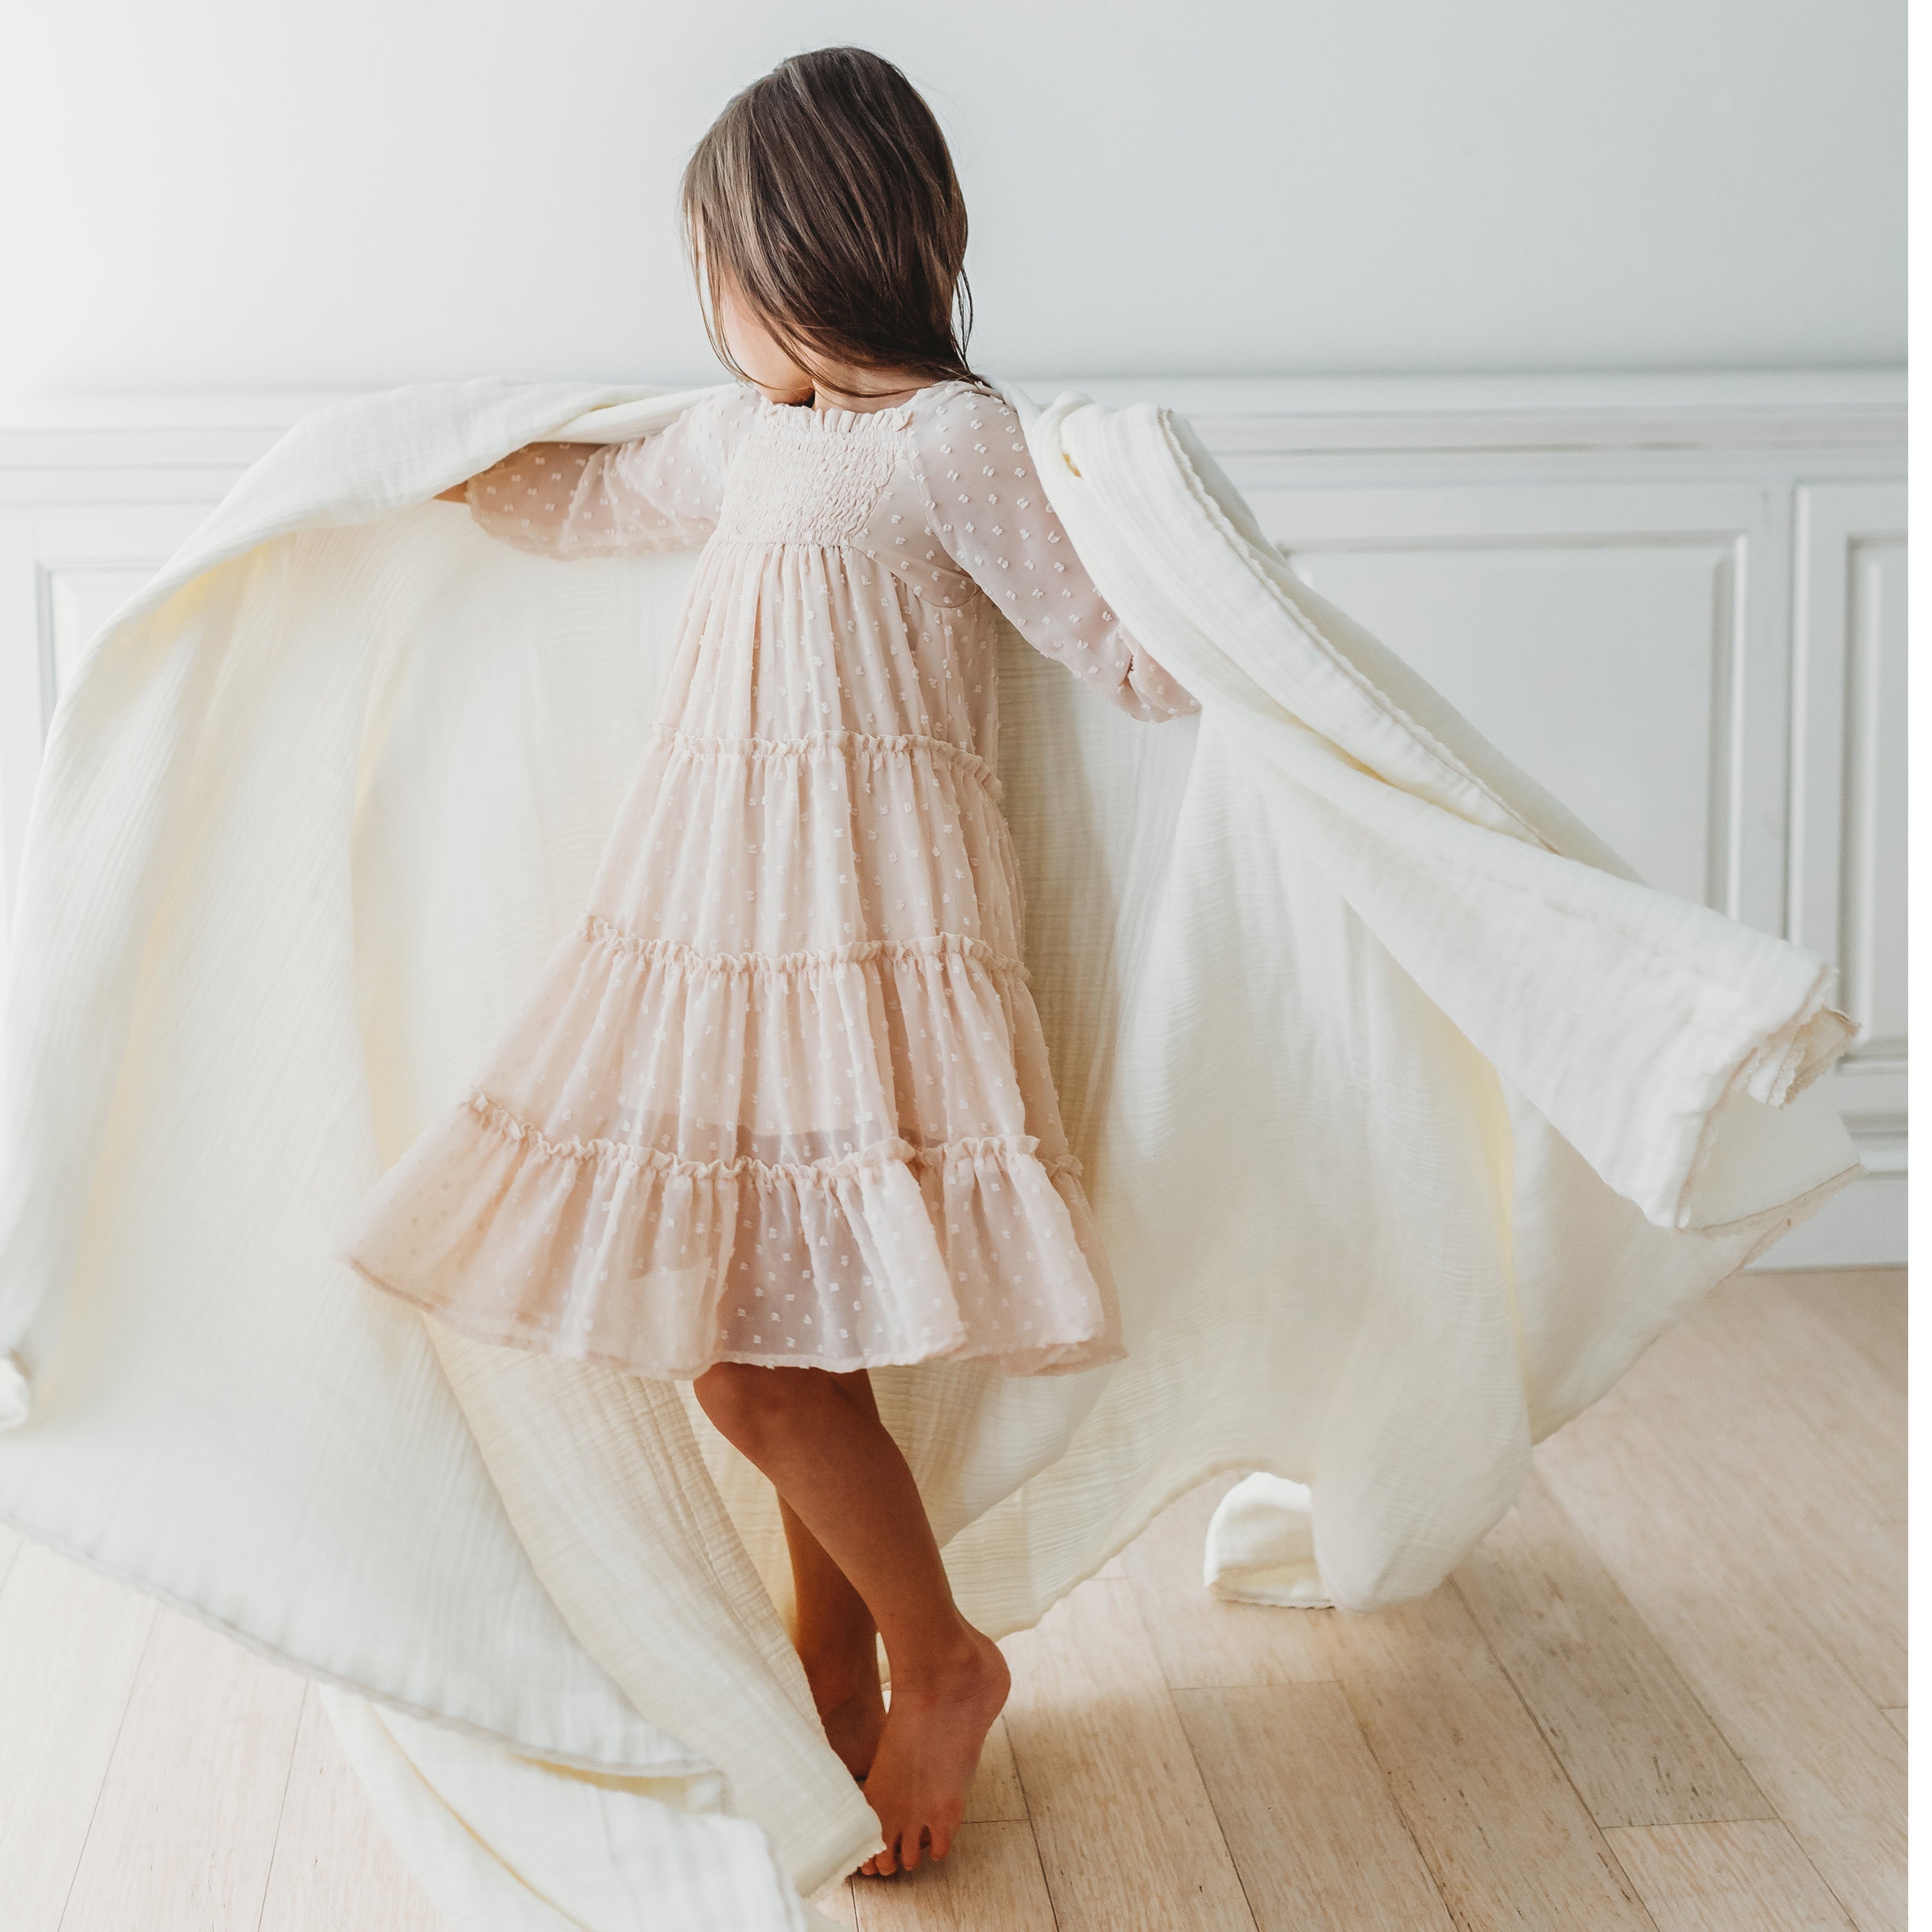 A young girl in a flowing beige dress twirls away from the camera in a bright room, her dress and Makemake Organics Organic Cotton Muslin Blanket - Ivory + Ivory Lace caught gracefully in mid-motion.